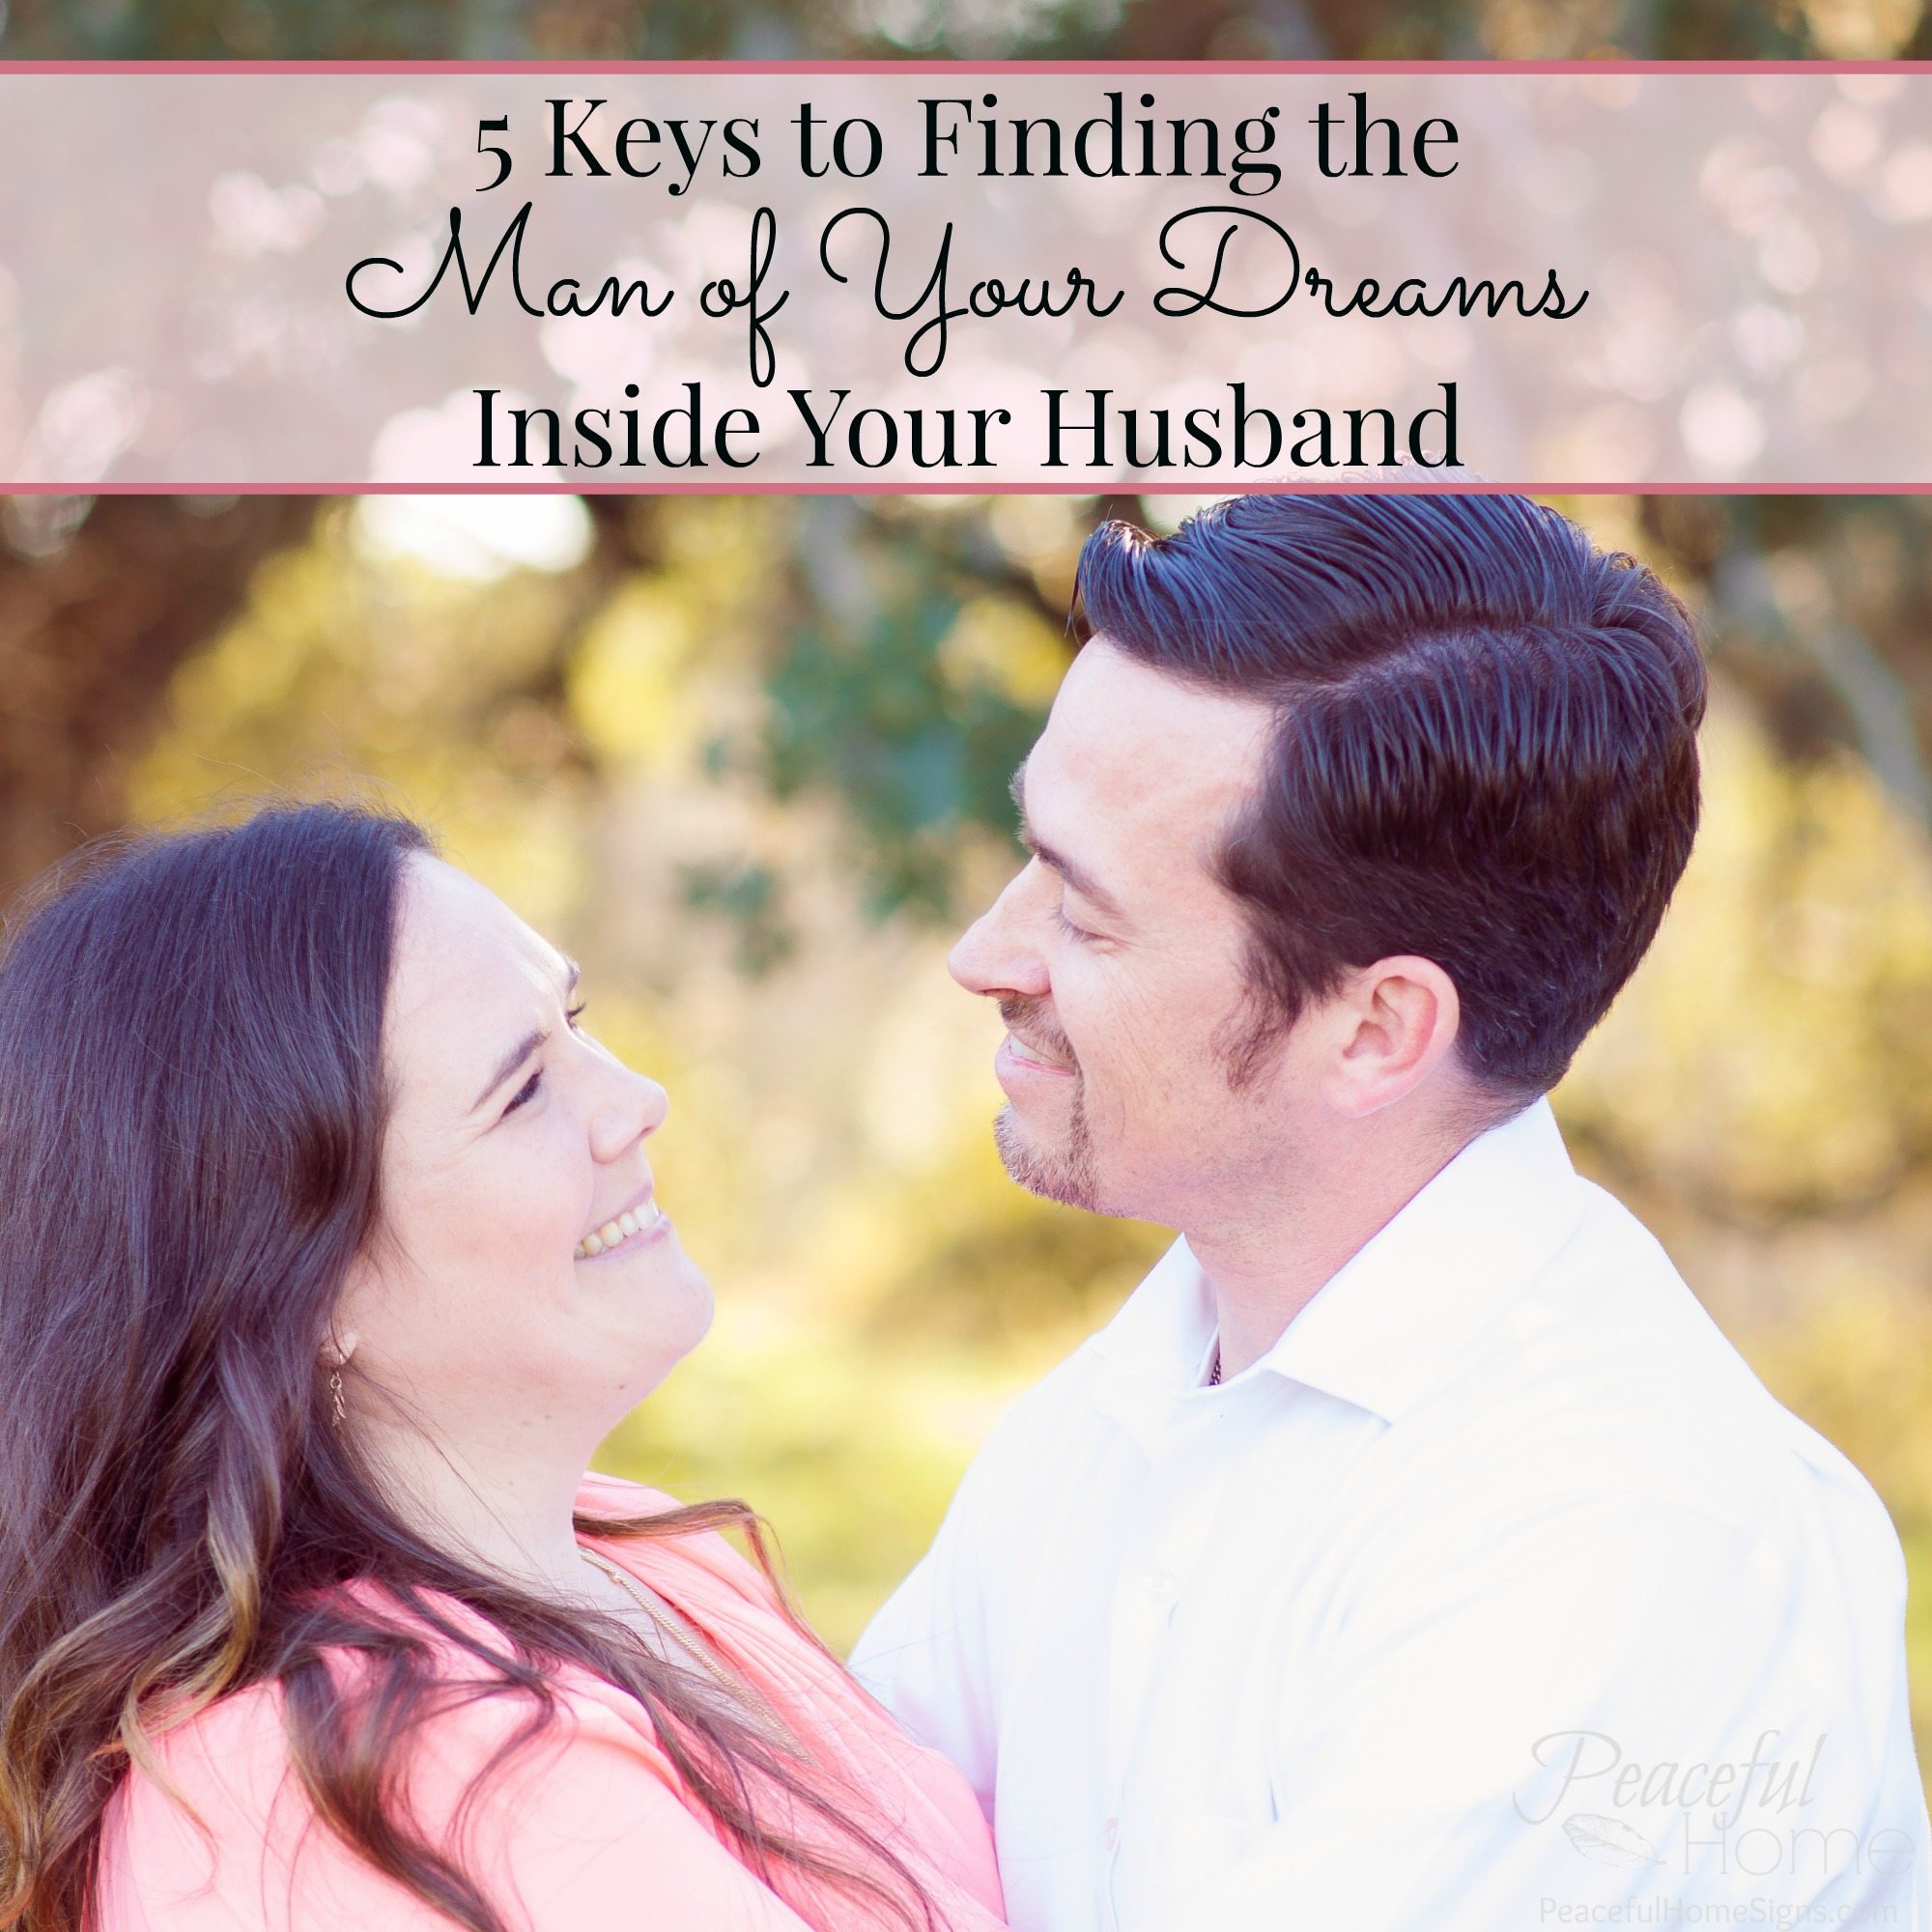 5 Keys to Finding the Man of Your Dreams Inside Your Husband